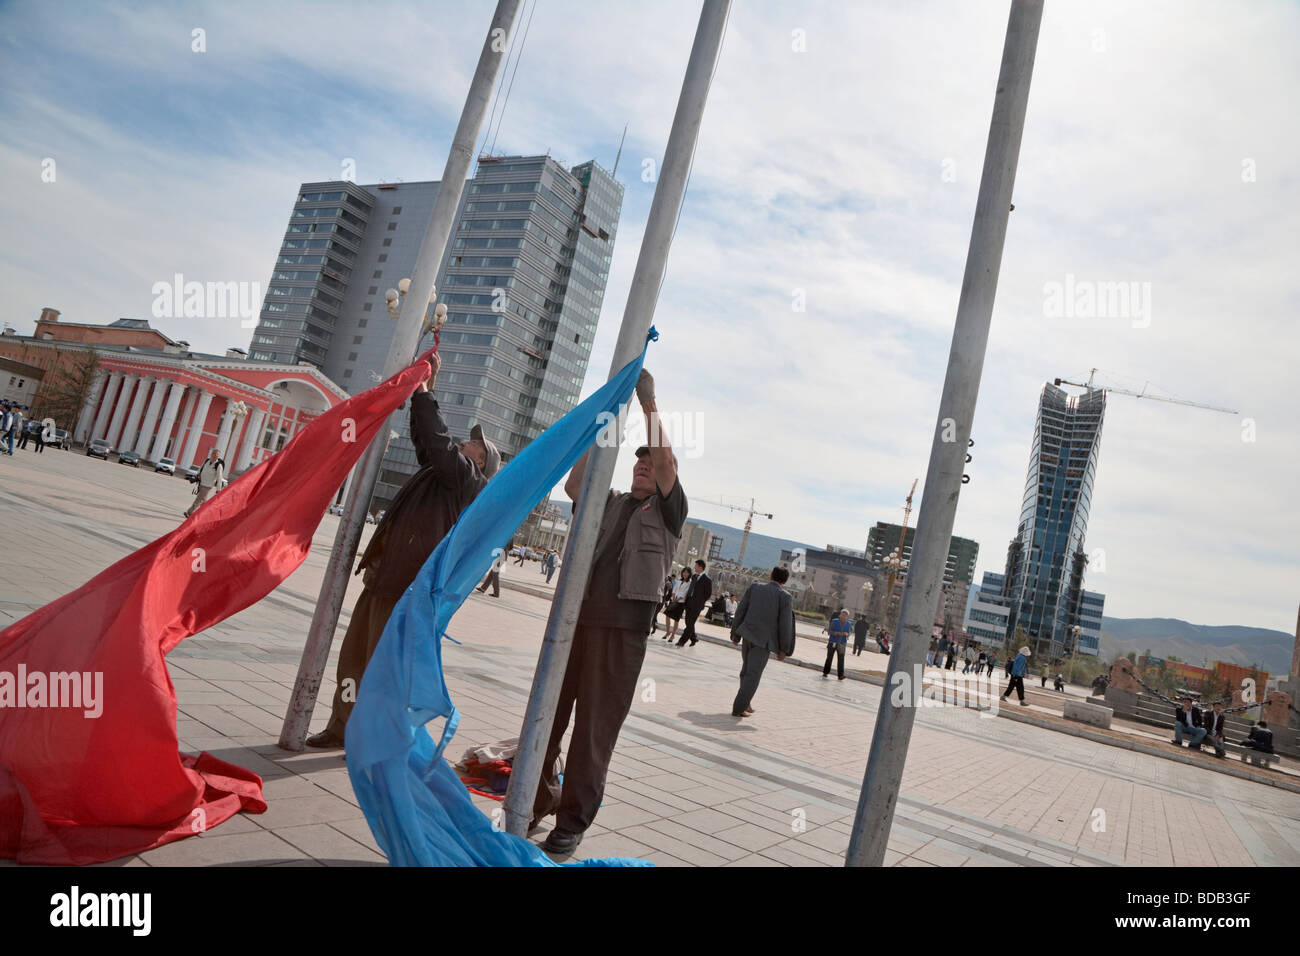 Mongolian men raise flags for a ceremony at Sukhbaatar Square, Ulaan Baatar, Mongolia Stock Photo